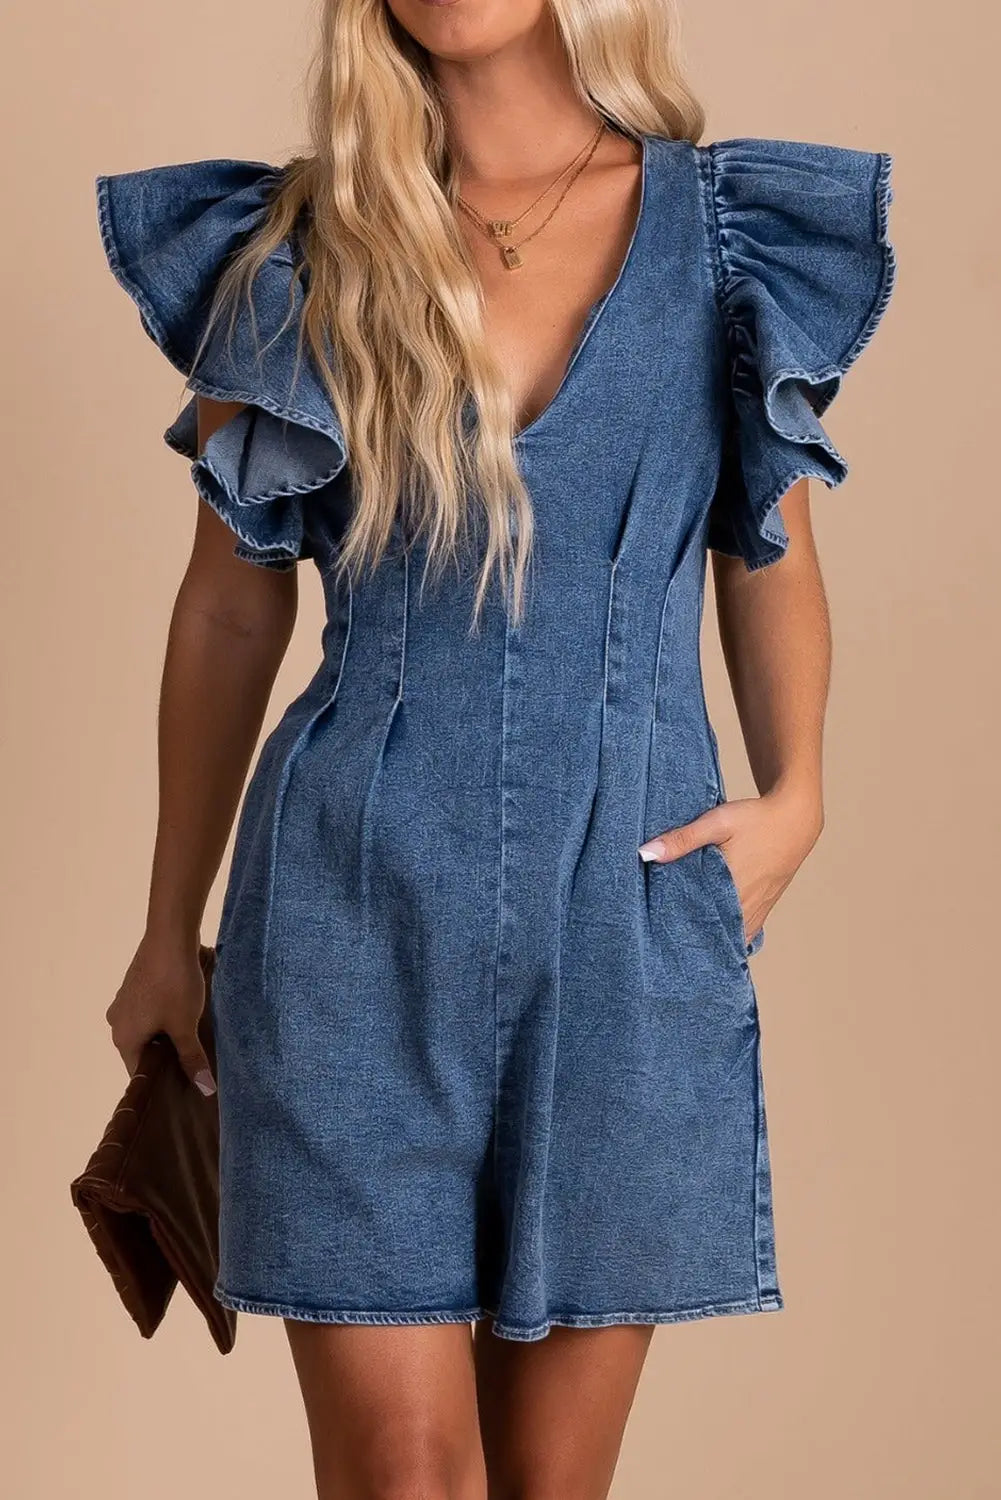 Blue ruffle pleated denim romper with pockets - s / 87% cotton + 6% polyester + 7% viscose - jumpsuits & rompers